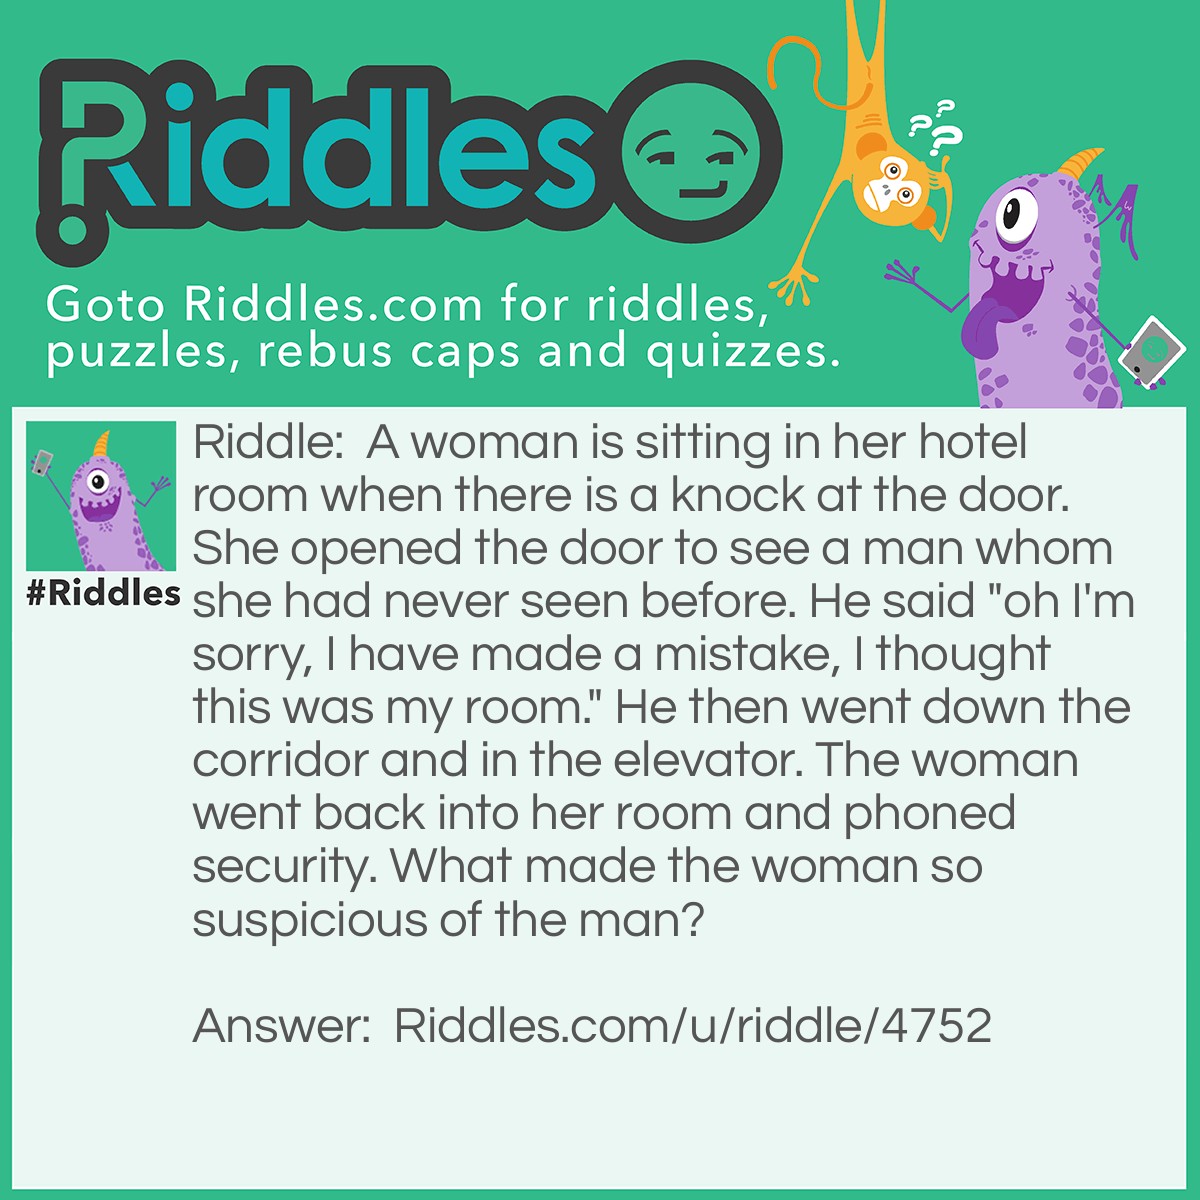 Riddle: A woman is sitting in her hotel room when there is a knock at the door. She opened the door to see a man whom she had never seen before. He said "oh I'm sorry, I have made a mistake, I thought this was my room." He then went down the corridor and in the elevator. The woman went back into her room and phoned security. What made the woman so suspicious of the man? Answer: You don't knock on your own hotel door and the man did.